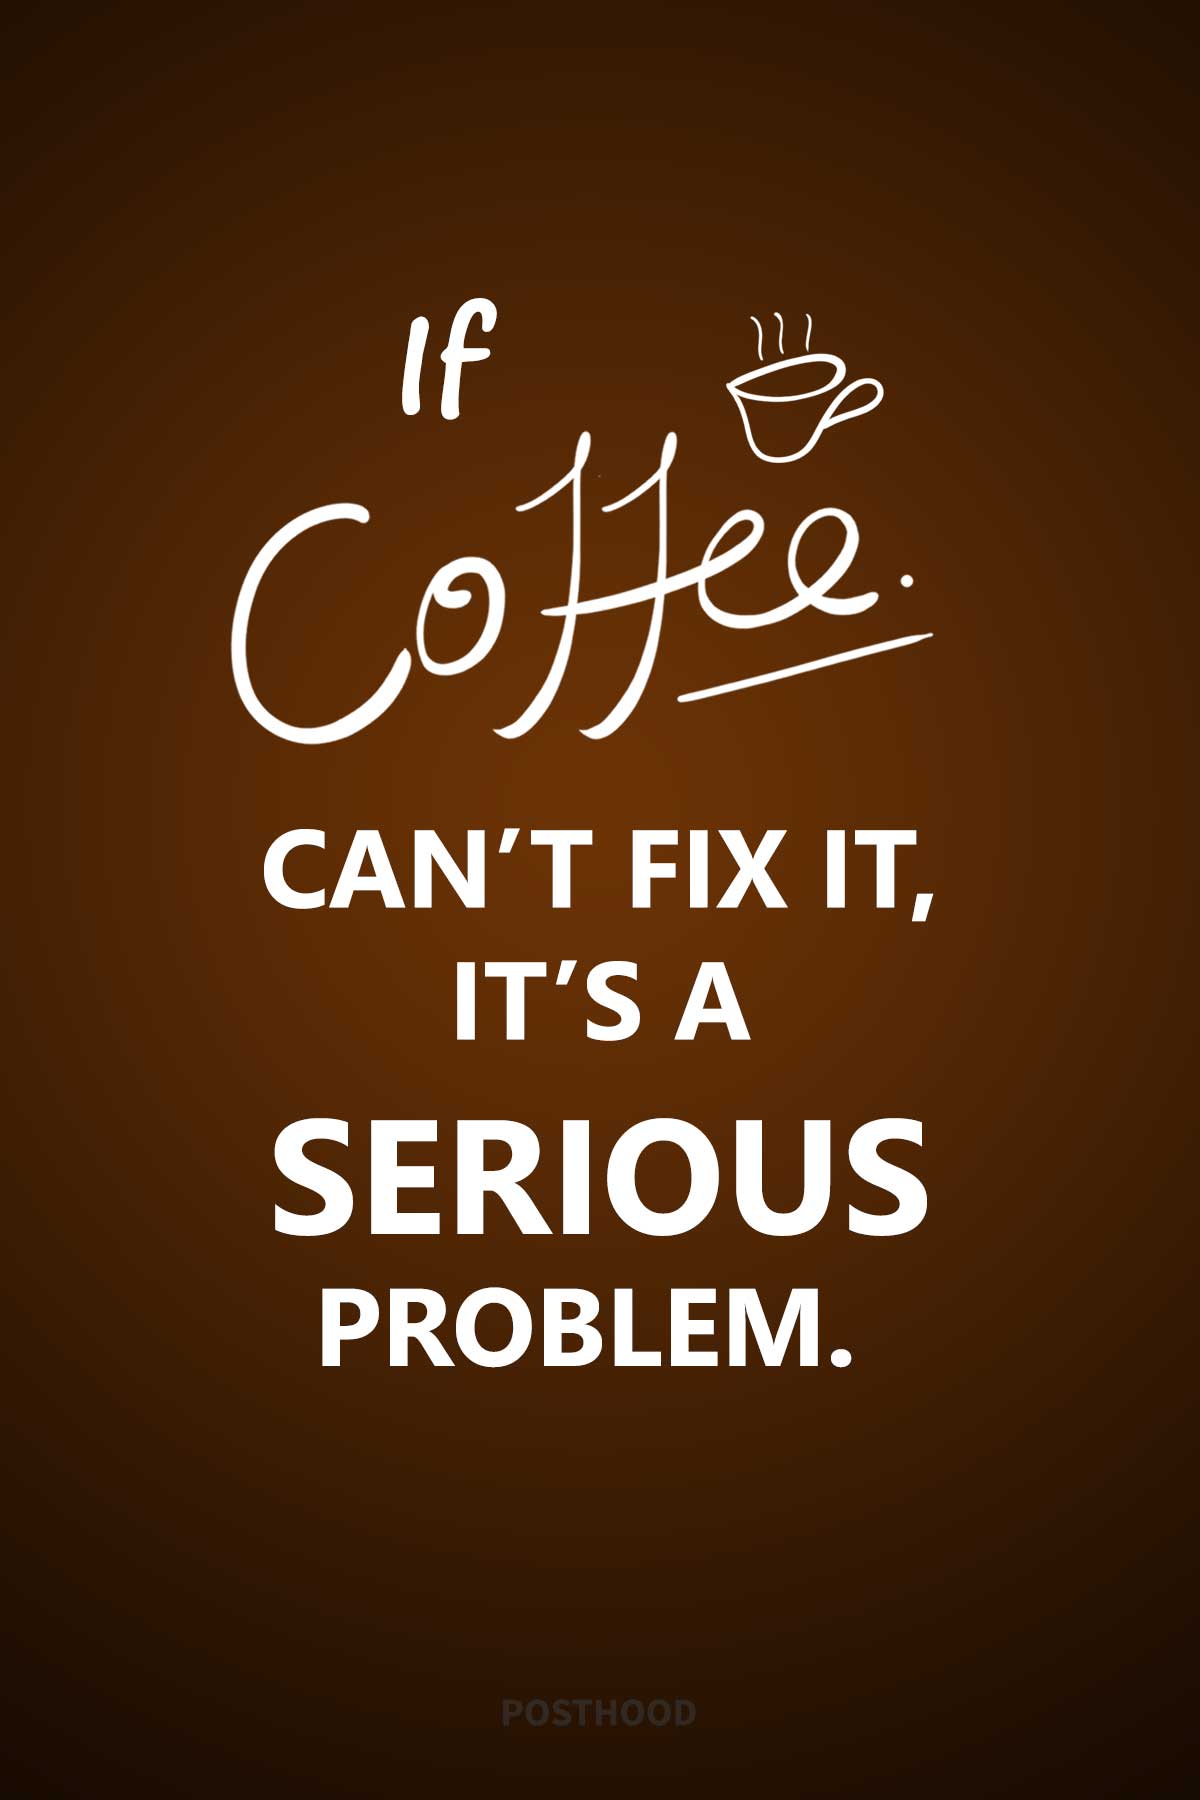 80 humor funny coffee quotes with images. A great collection of coffee quotes for coffee lovers to express their coffee love. 